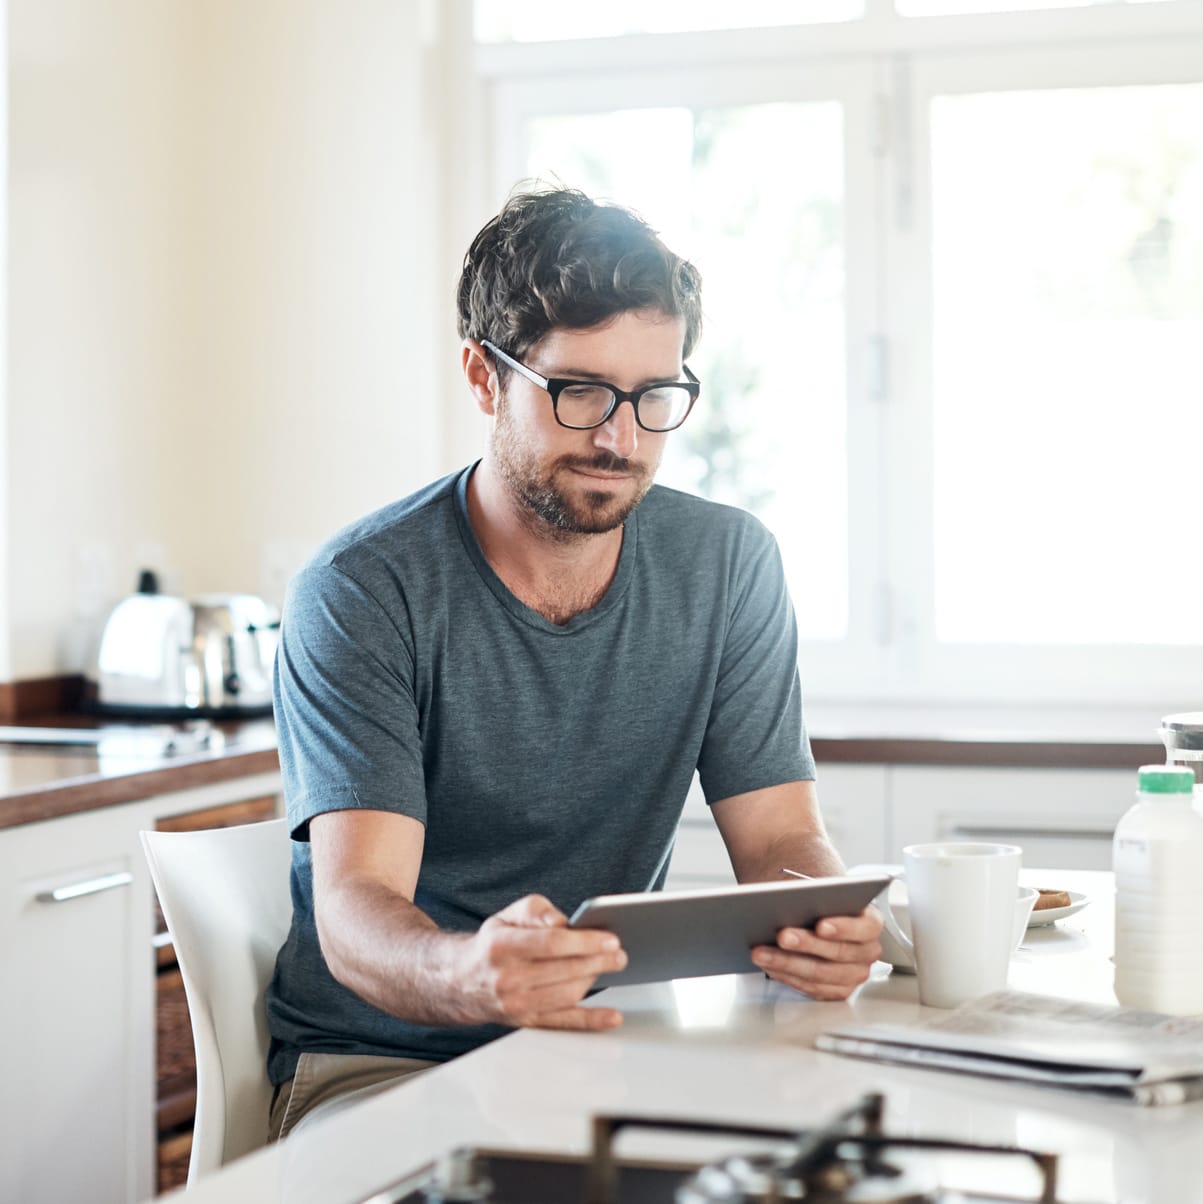 man using tablet at kitchen table